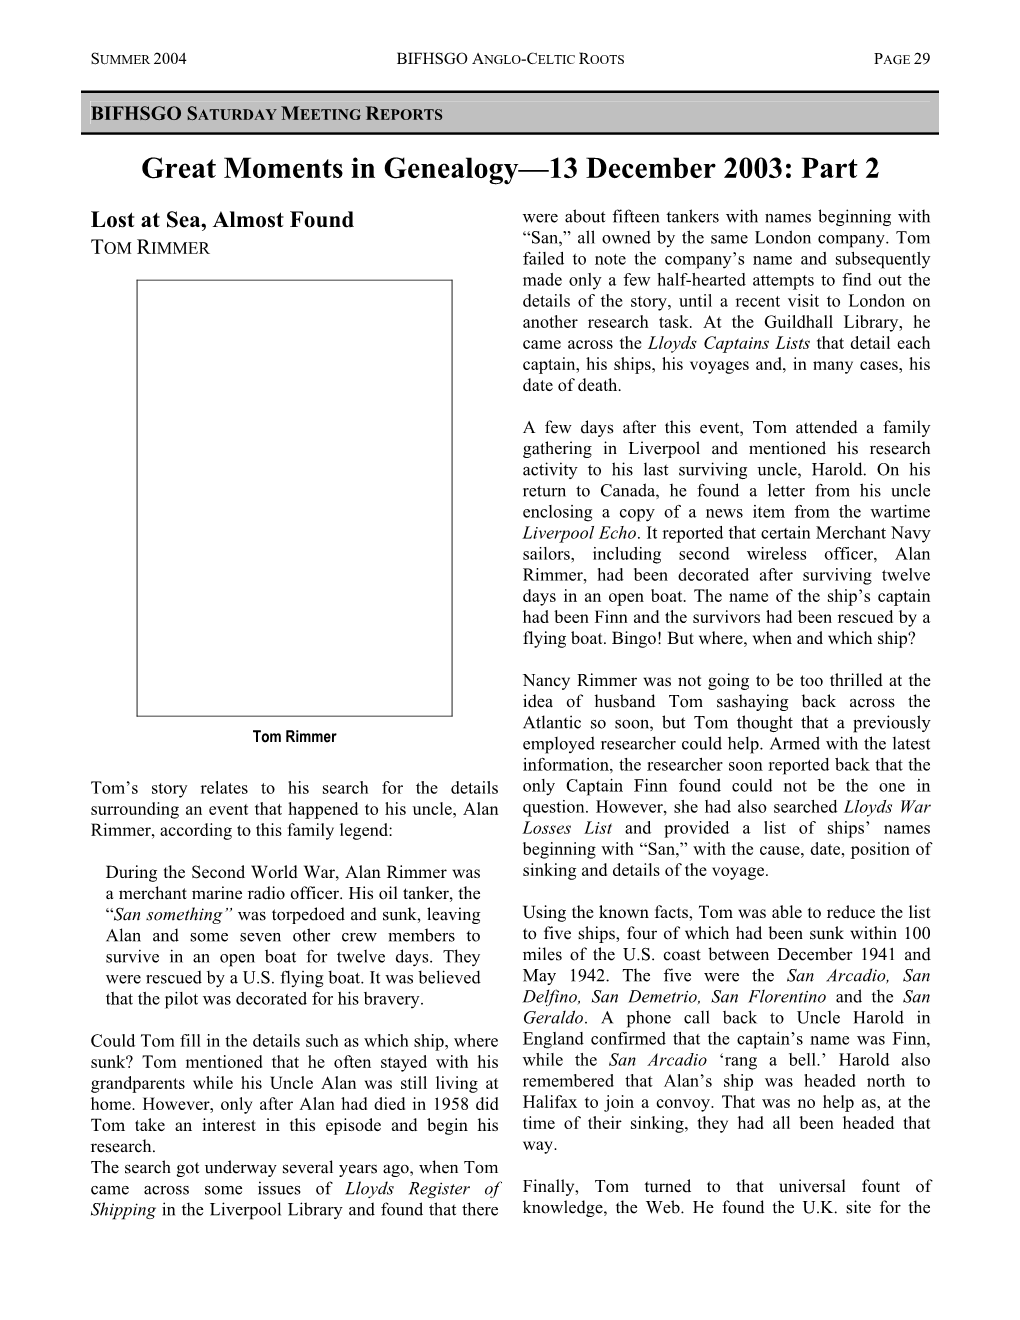 Great Moments in Genealogy—13 December 2003: Part 2